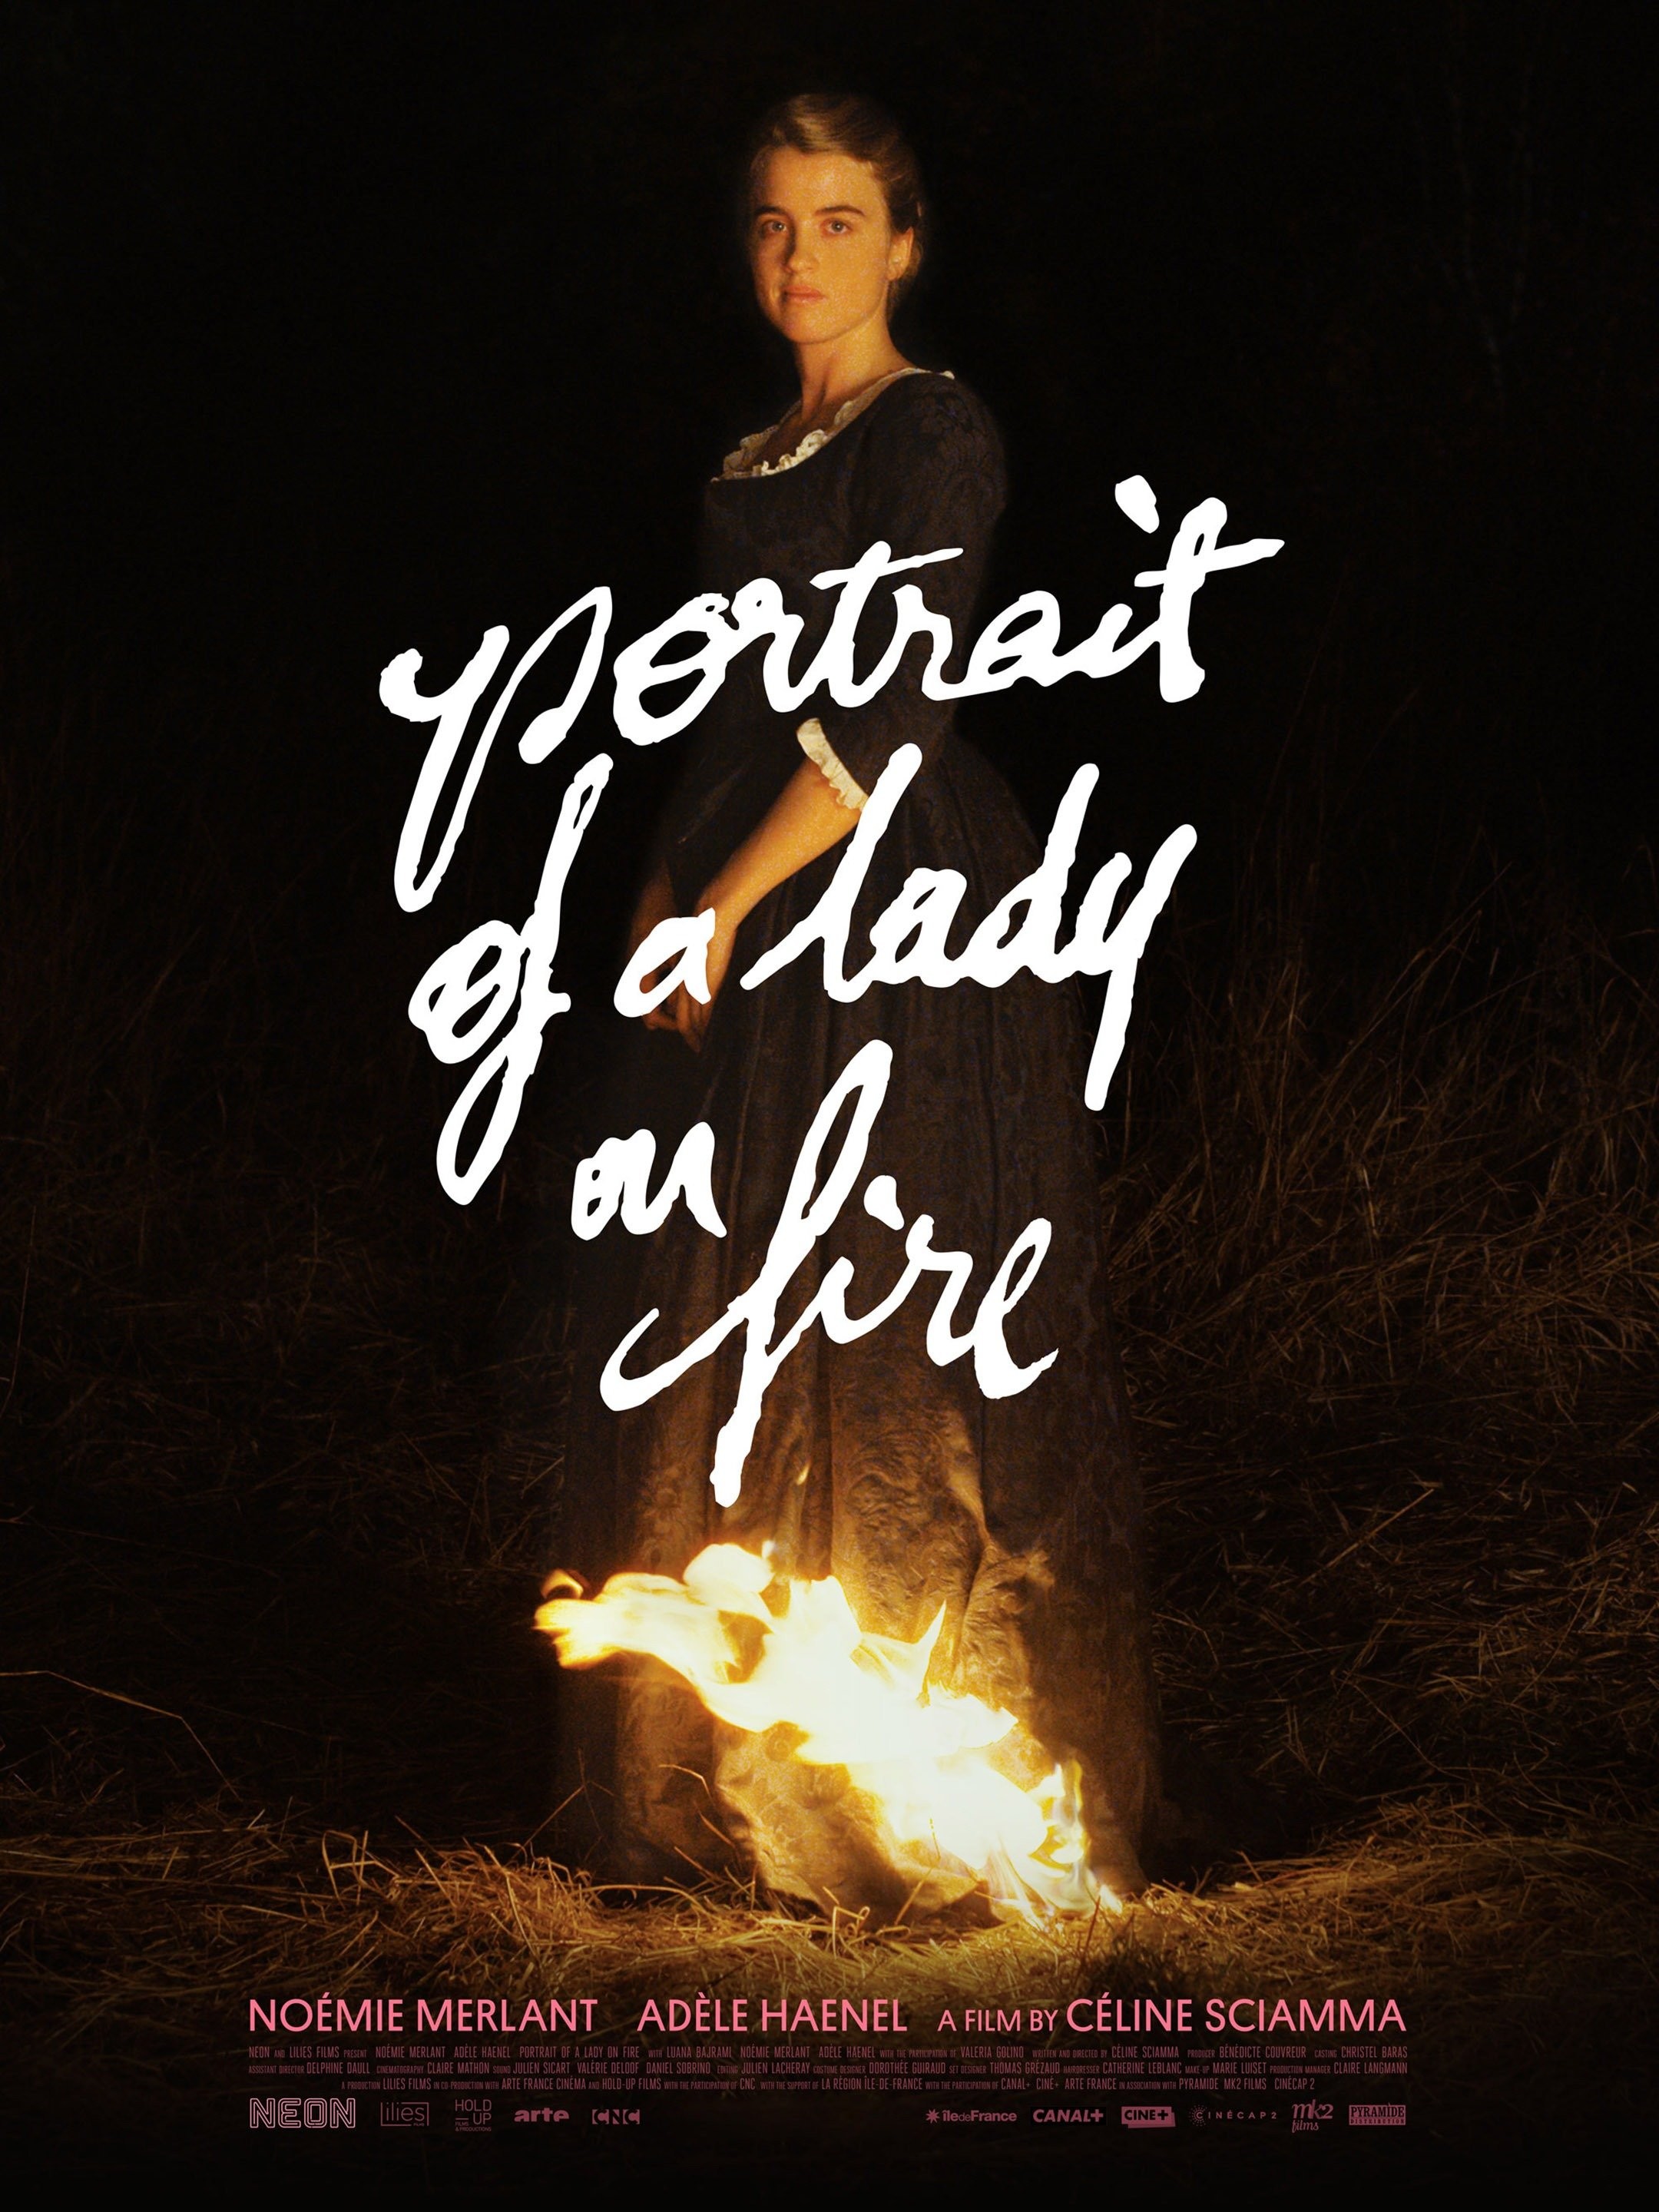 How the Women of 'Portrait of a Lady on Fire' Control the Narrative